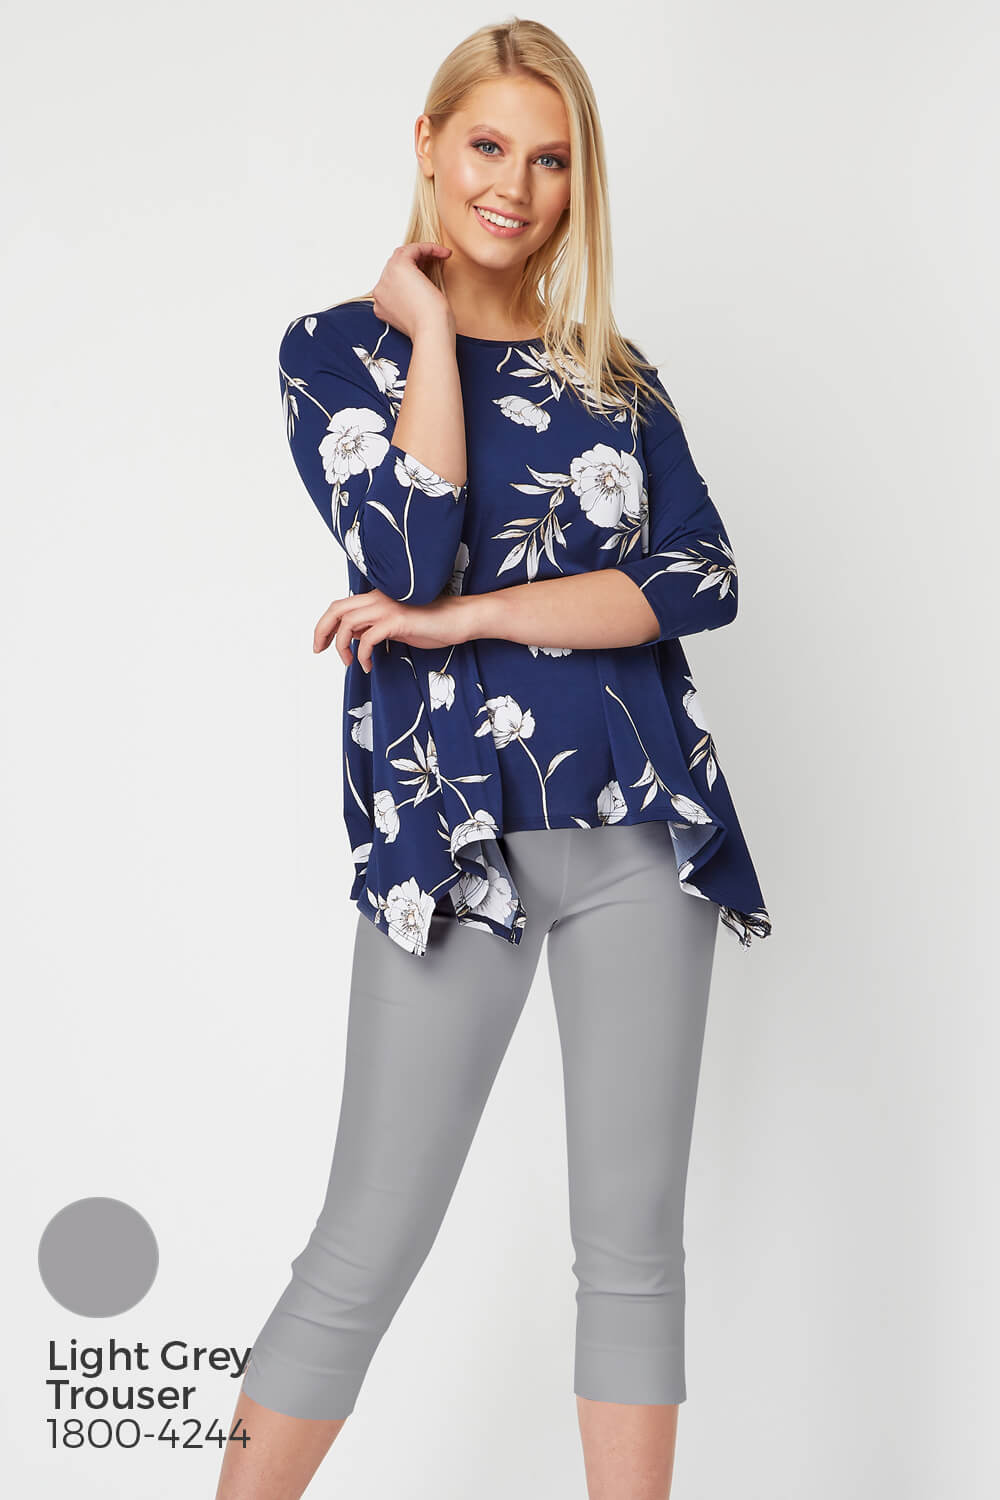 Navy  Floral 3/4 Sleeve Smock Top, Image 6 of 8